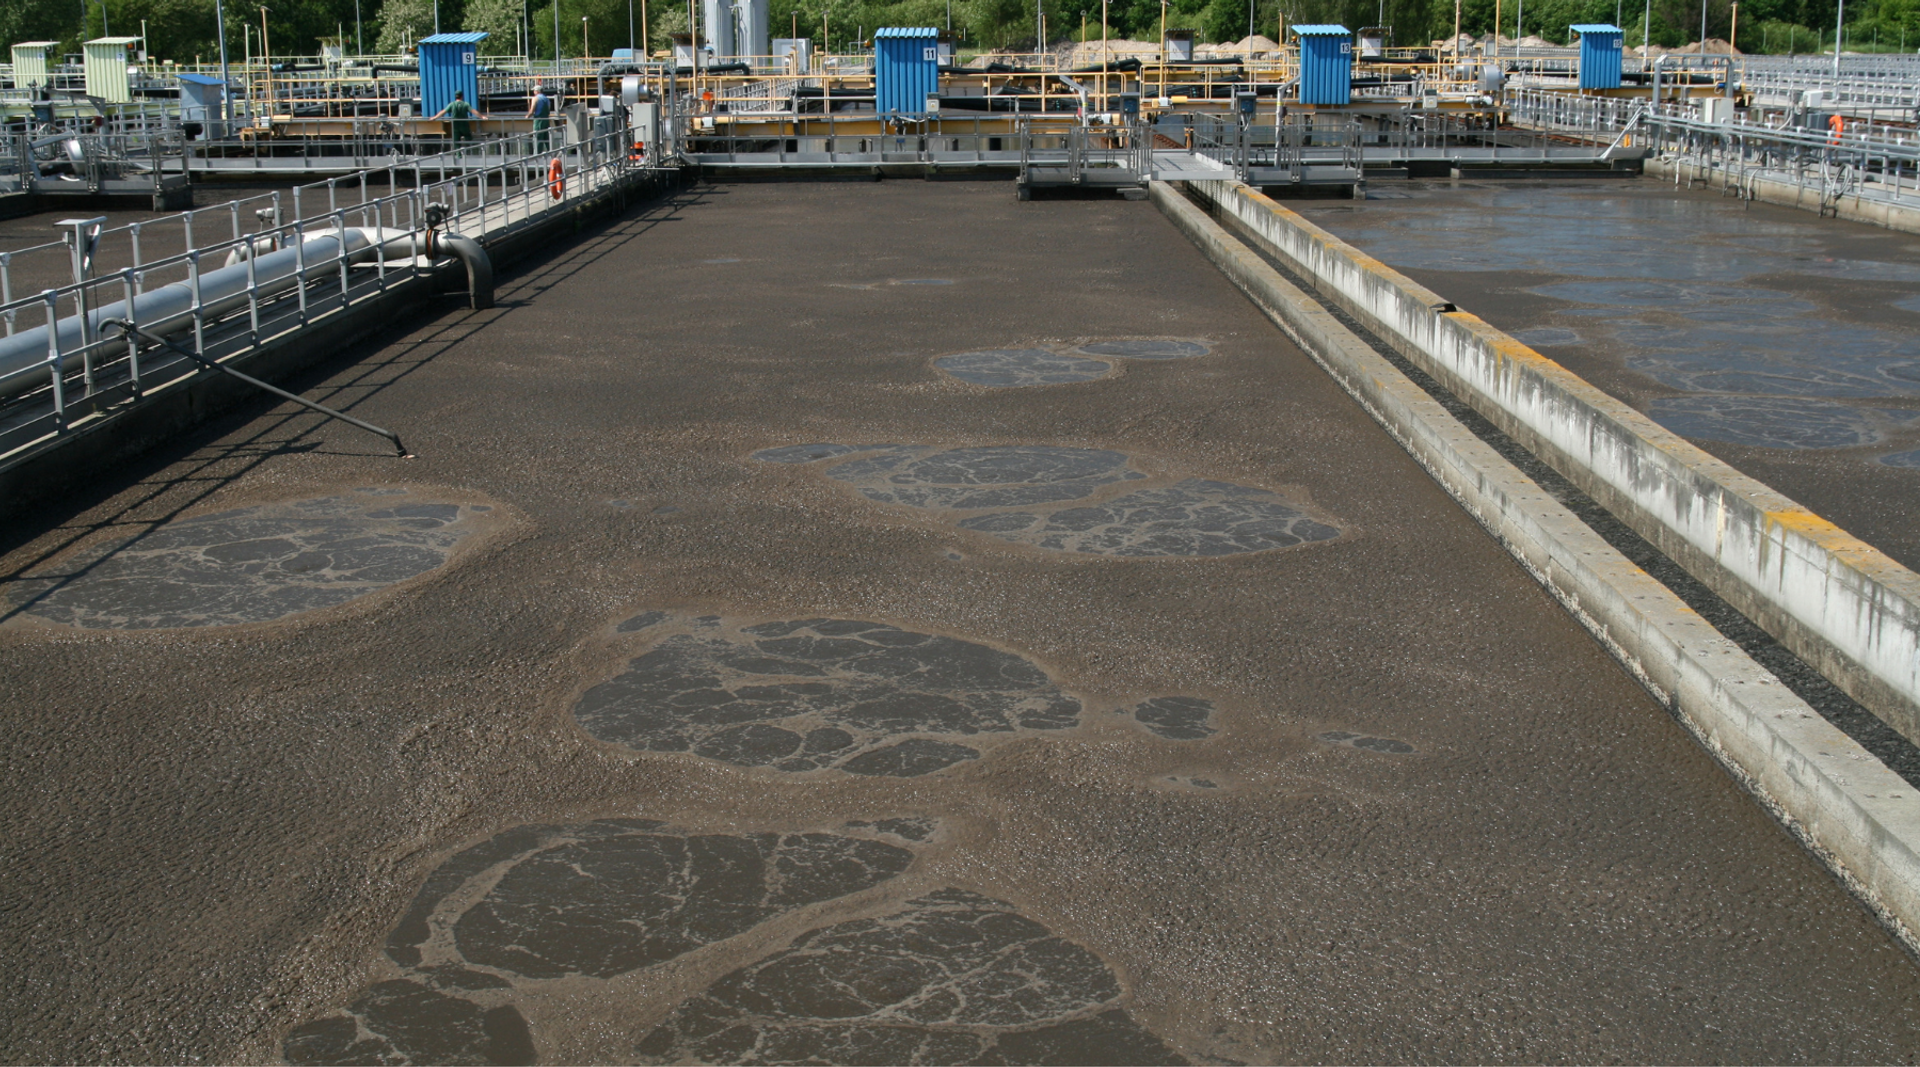 Nutrient deficiency foam in a wastewater treatment plant